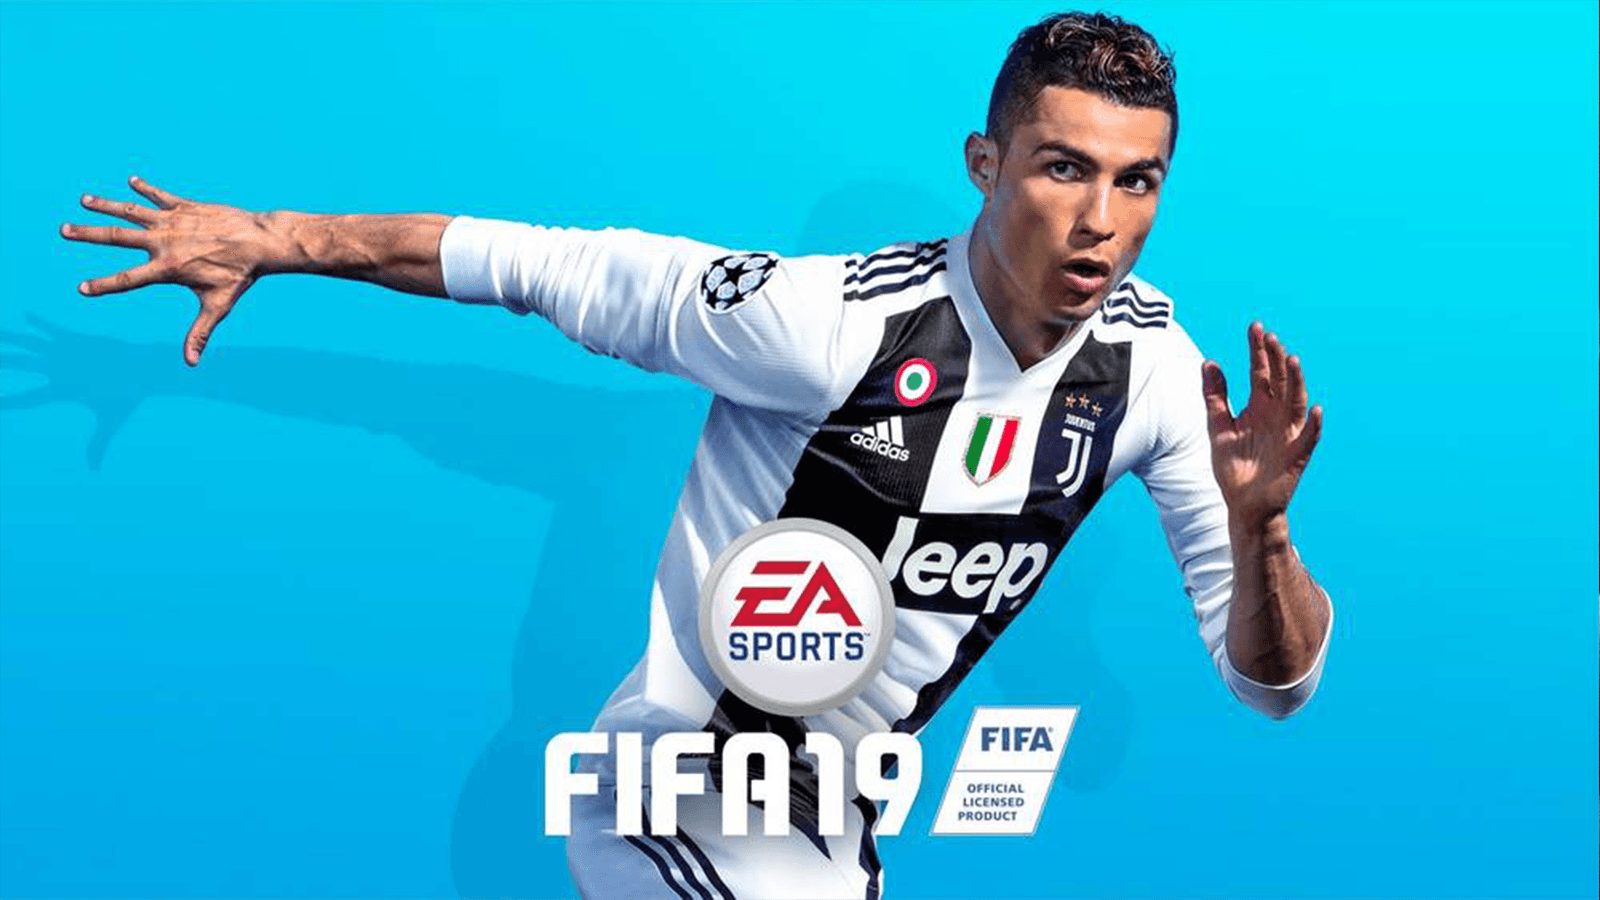 How to play the FIFA 19 demo on PlayStation 4